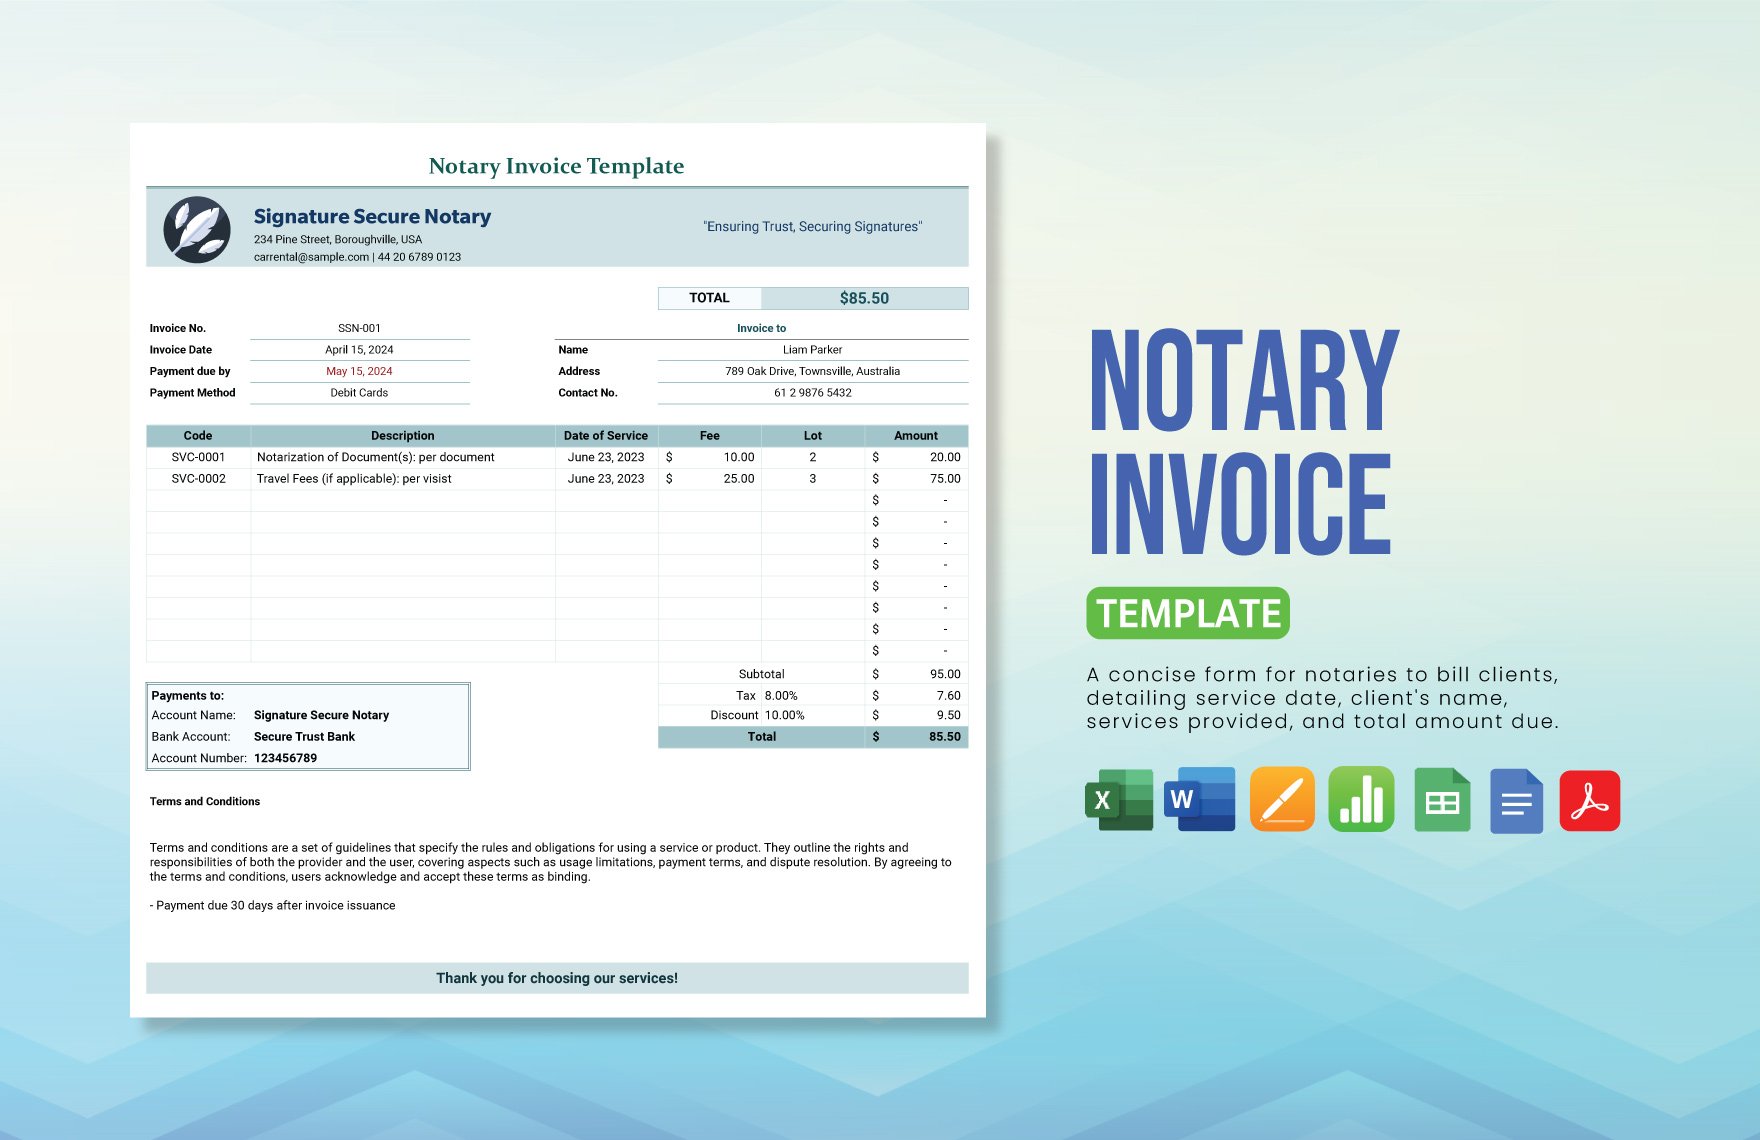 Notary Invoice Template in Word, Google Docs, Excel, PDF, Google Sheets, Apple Pages, Apple Numbers